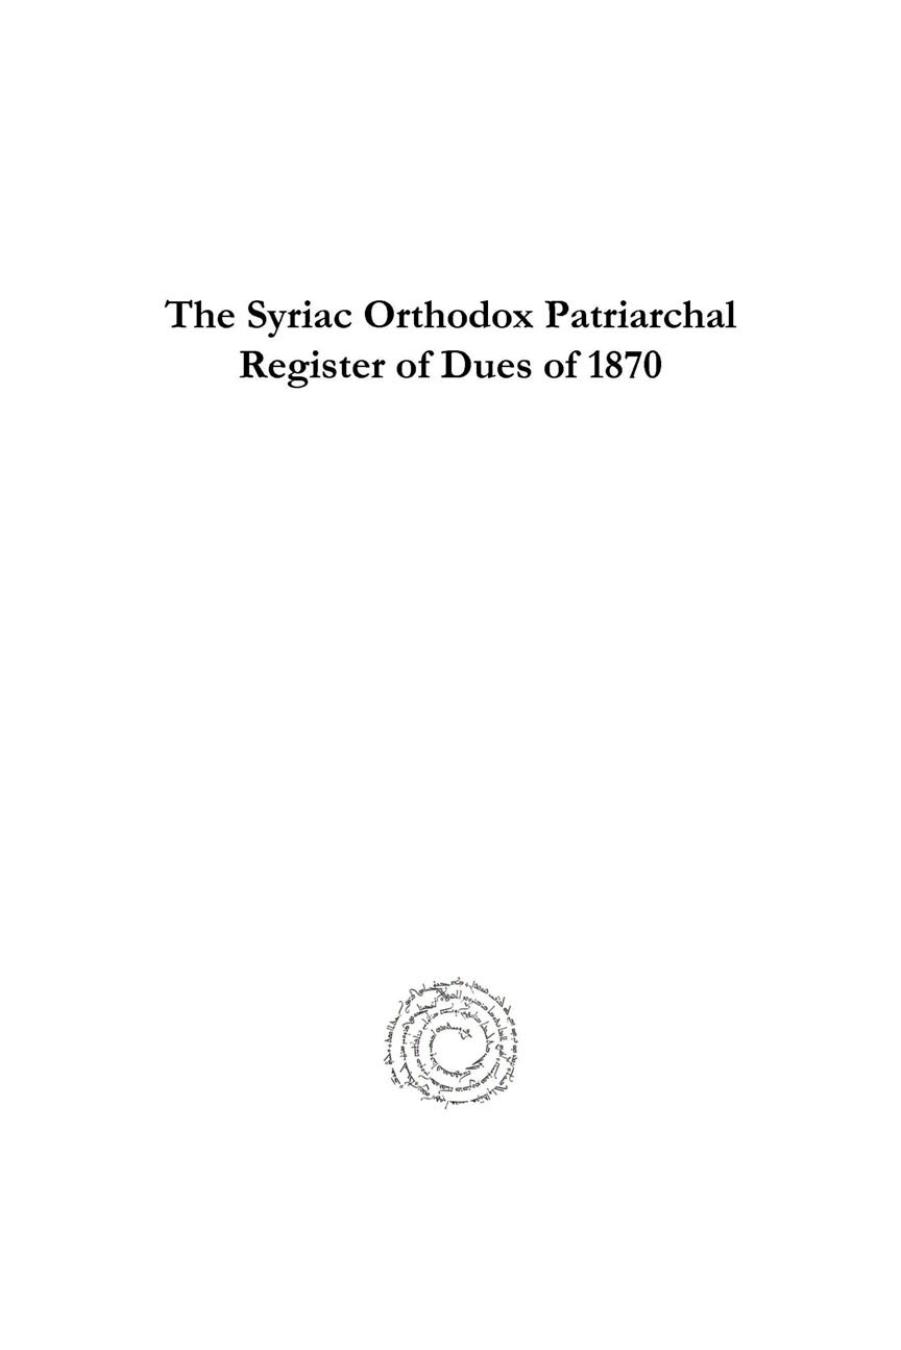 The Syriac Orthodox Patriarchal Register of Dues of 1870 by Iskandar Bcheiry